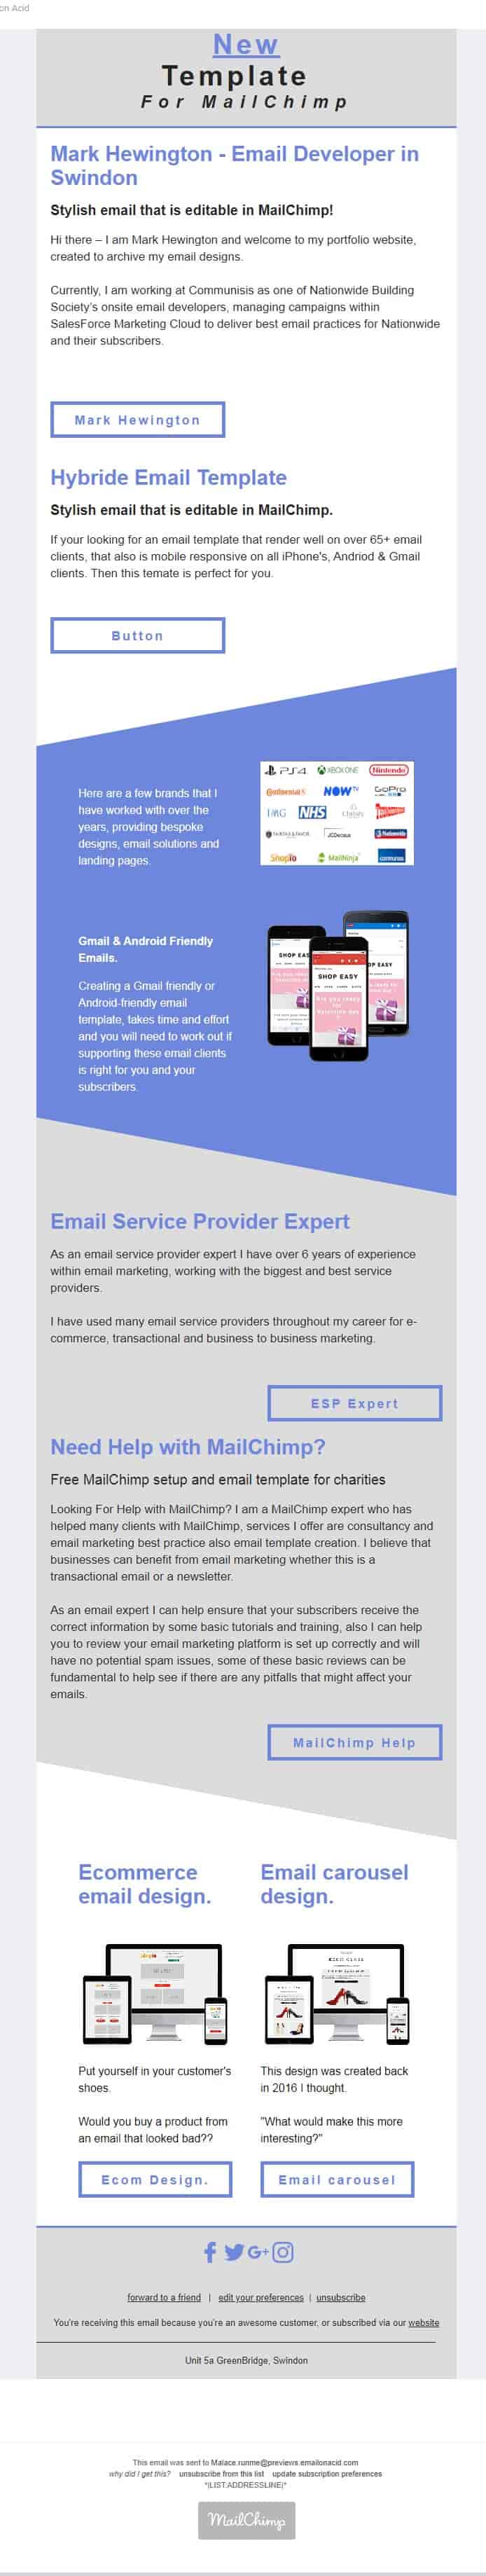 Editable MailChimp Email Template design for Yahoo email clients